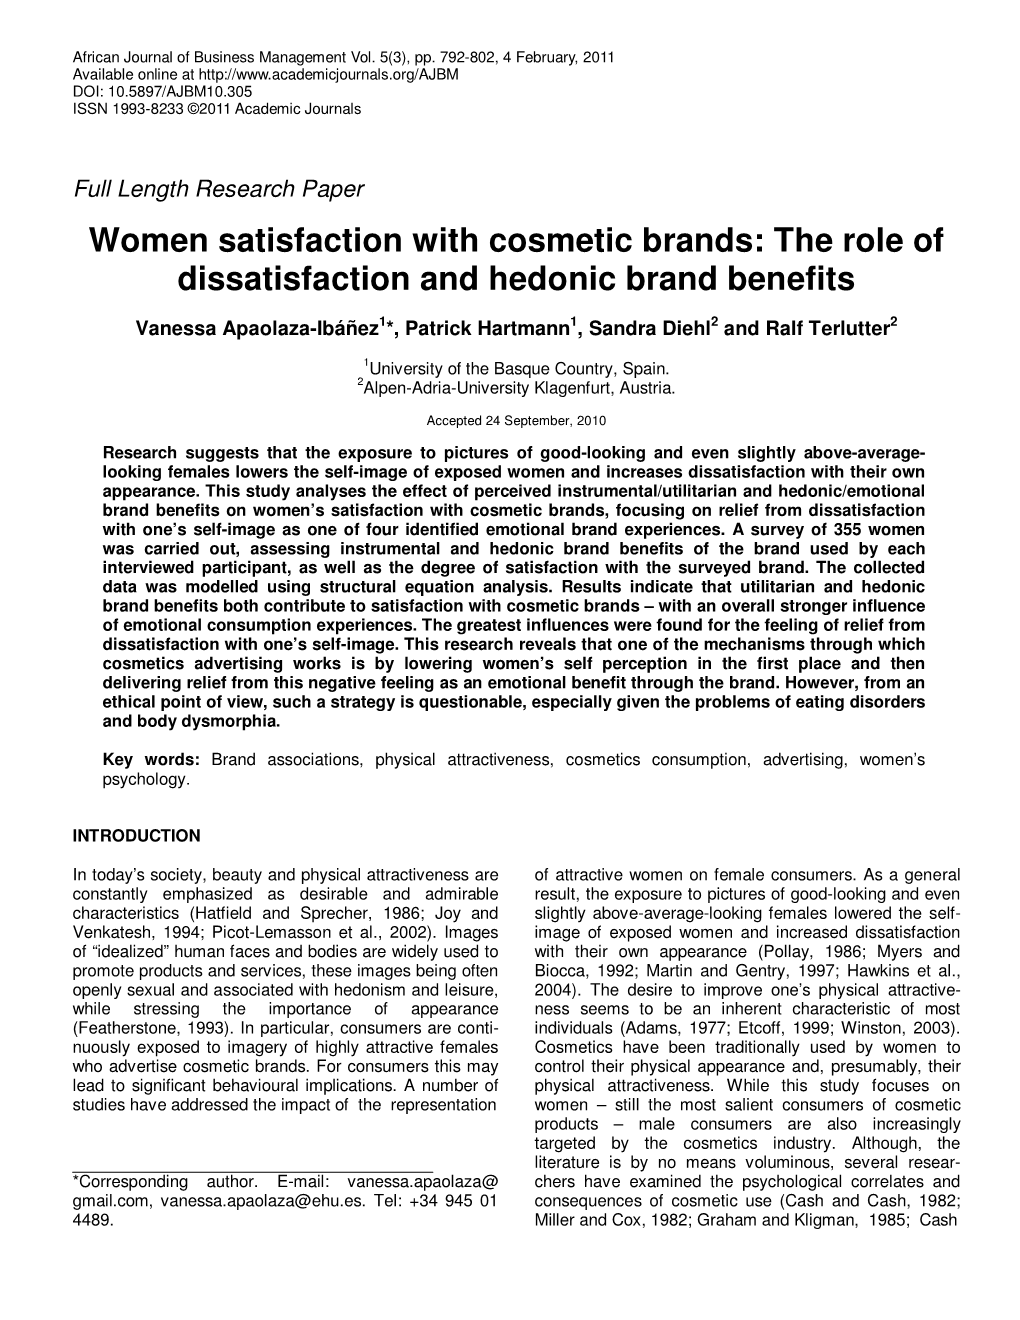 Women Satisfaction with Cosmetic Brands: the Role of Dissatisfaction and Hedonic Brand Benefits